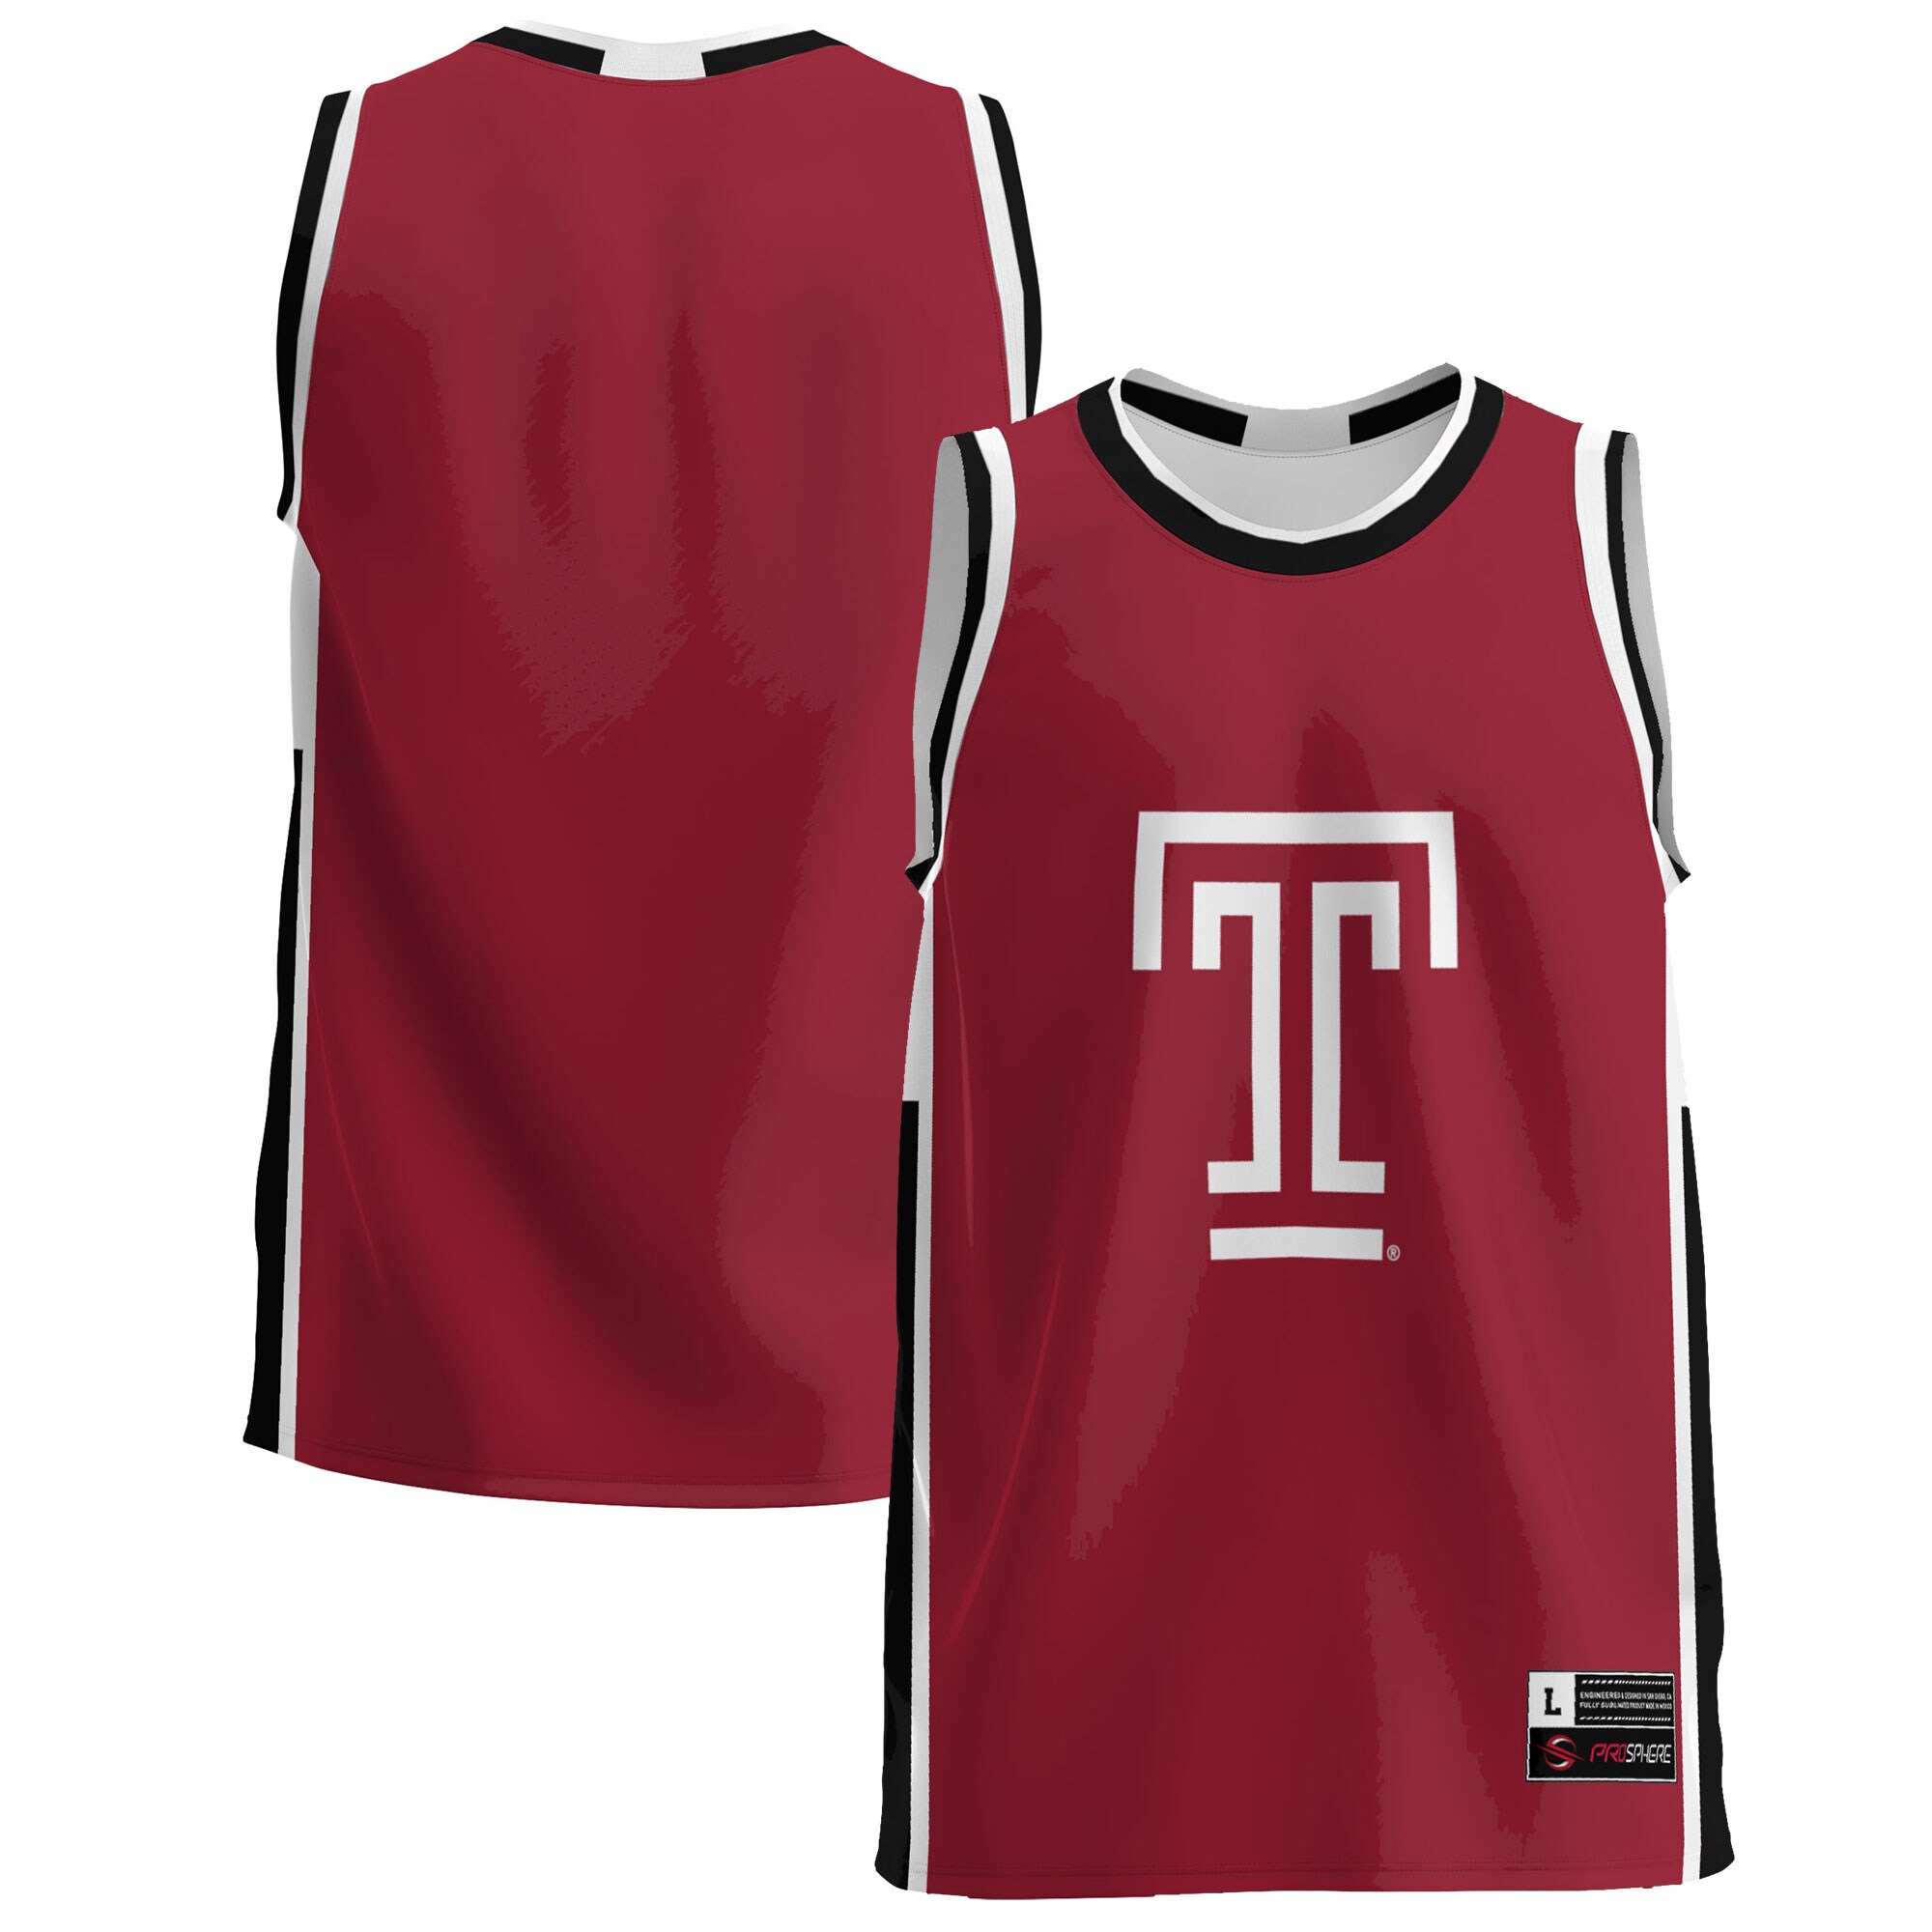 Temple Owls Basketball Jersey - Cherry For Youth Women Men